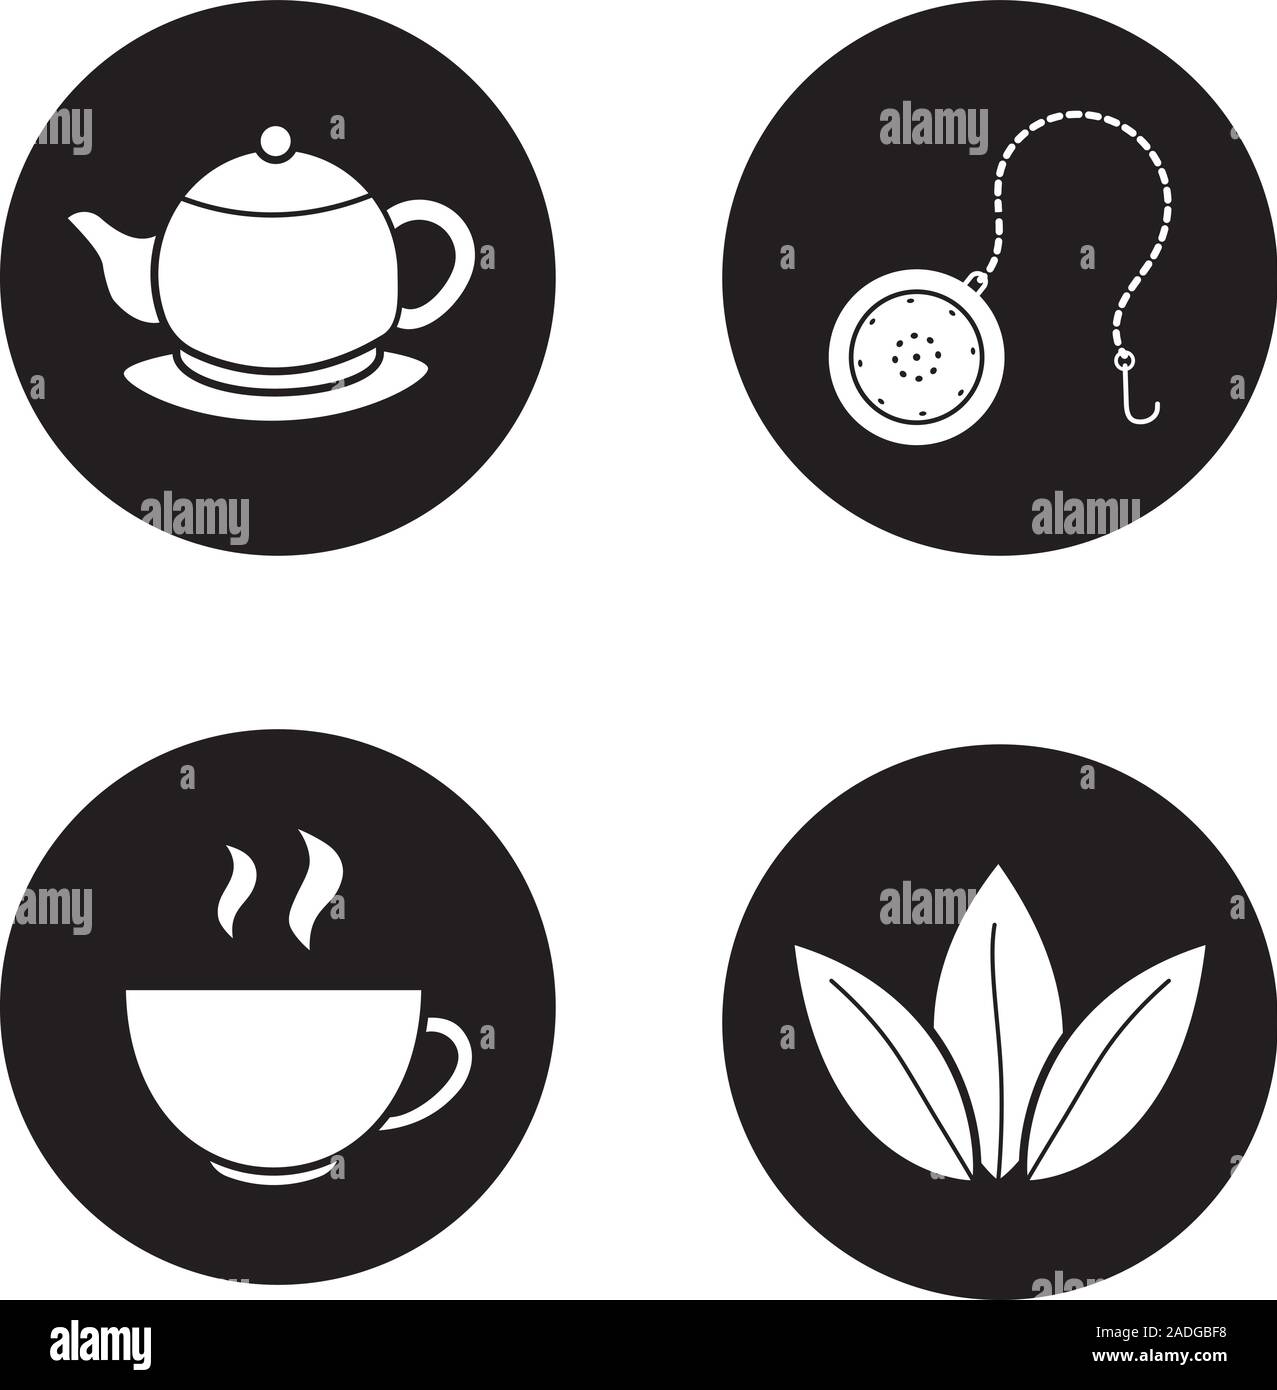 Tea icons set. Steaming cup, teapot on plate, loose tea leaves and ball infuser. Vector white silhouettes illustrations in black circles Stock Vector